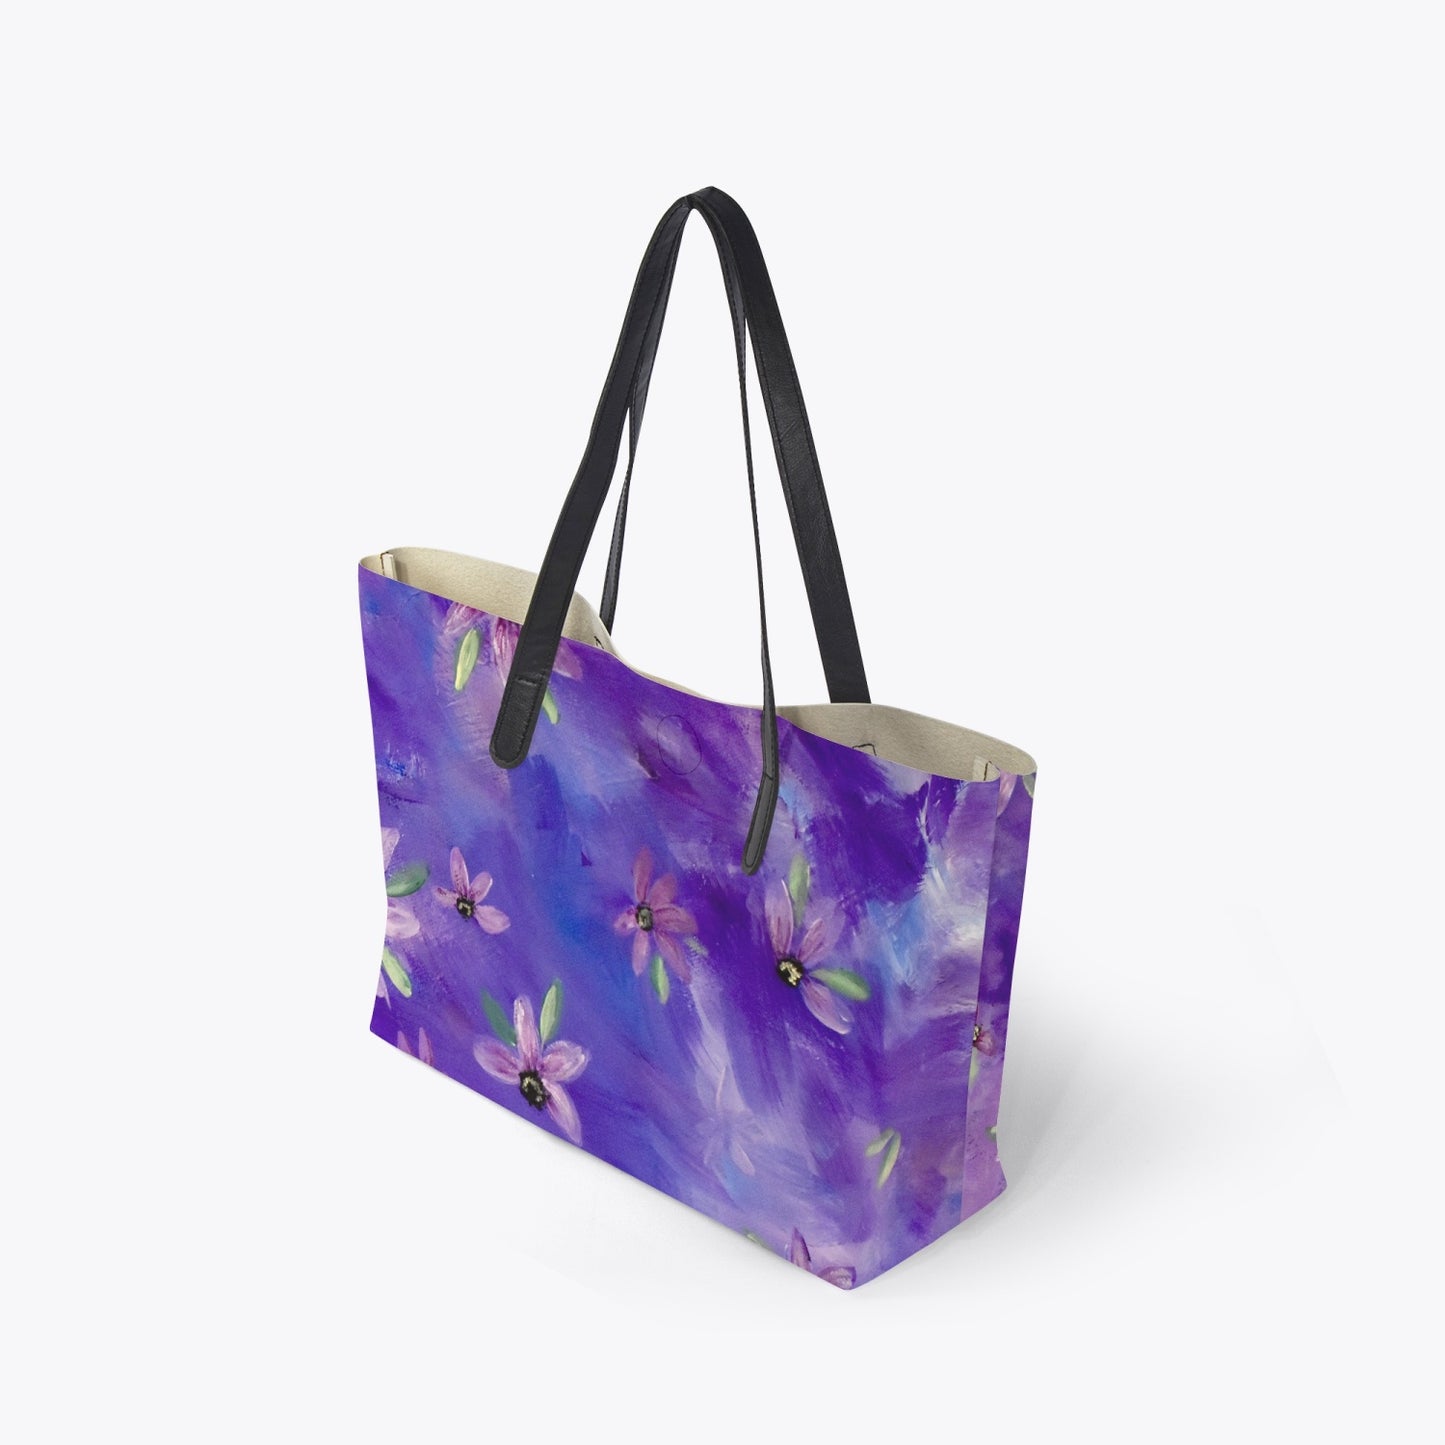 Purple Sunflower Tote Bag With Black Handles